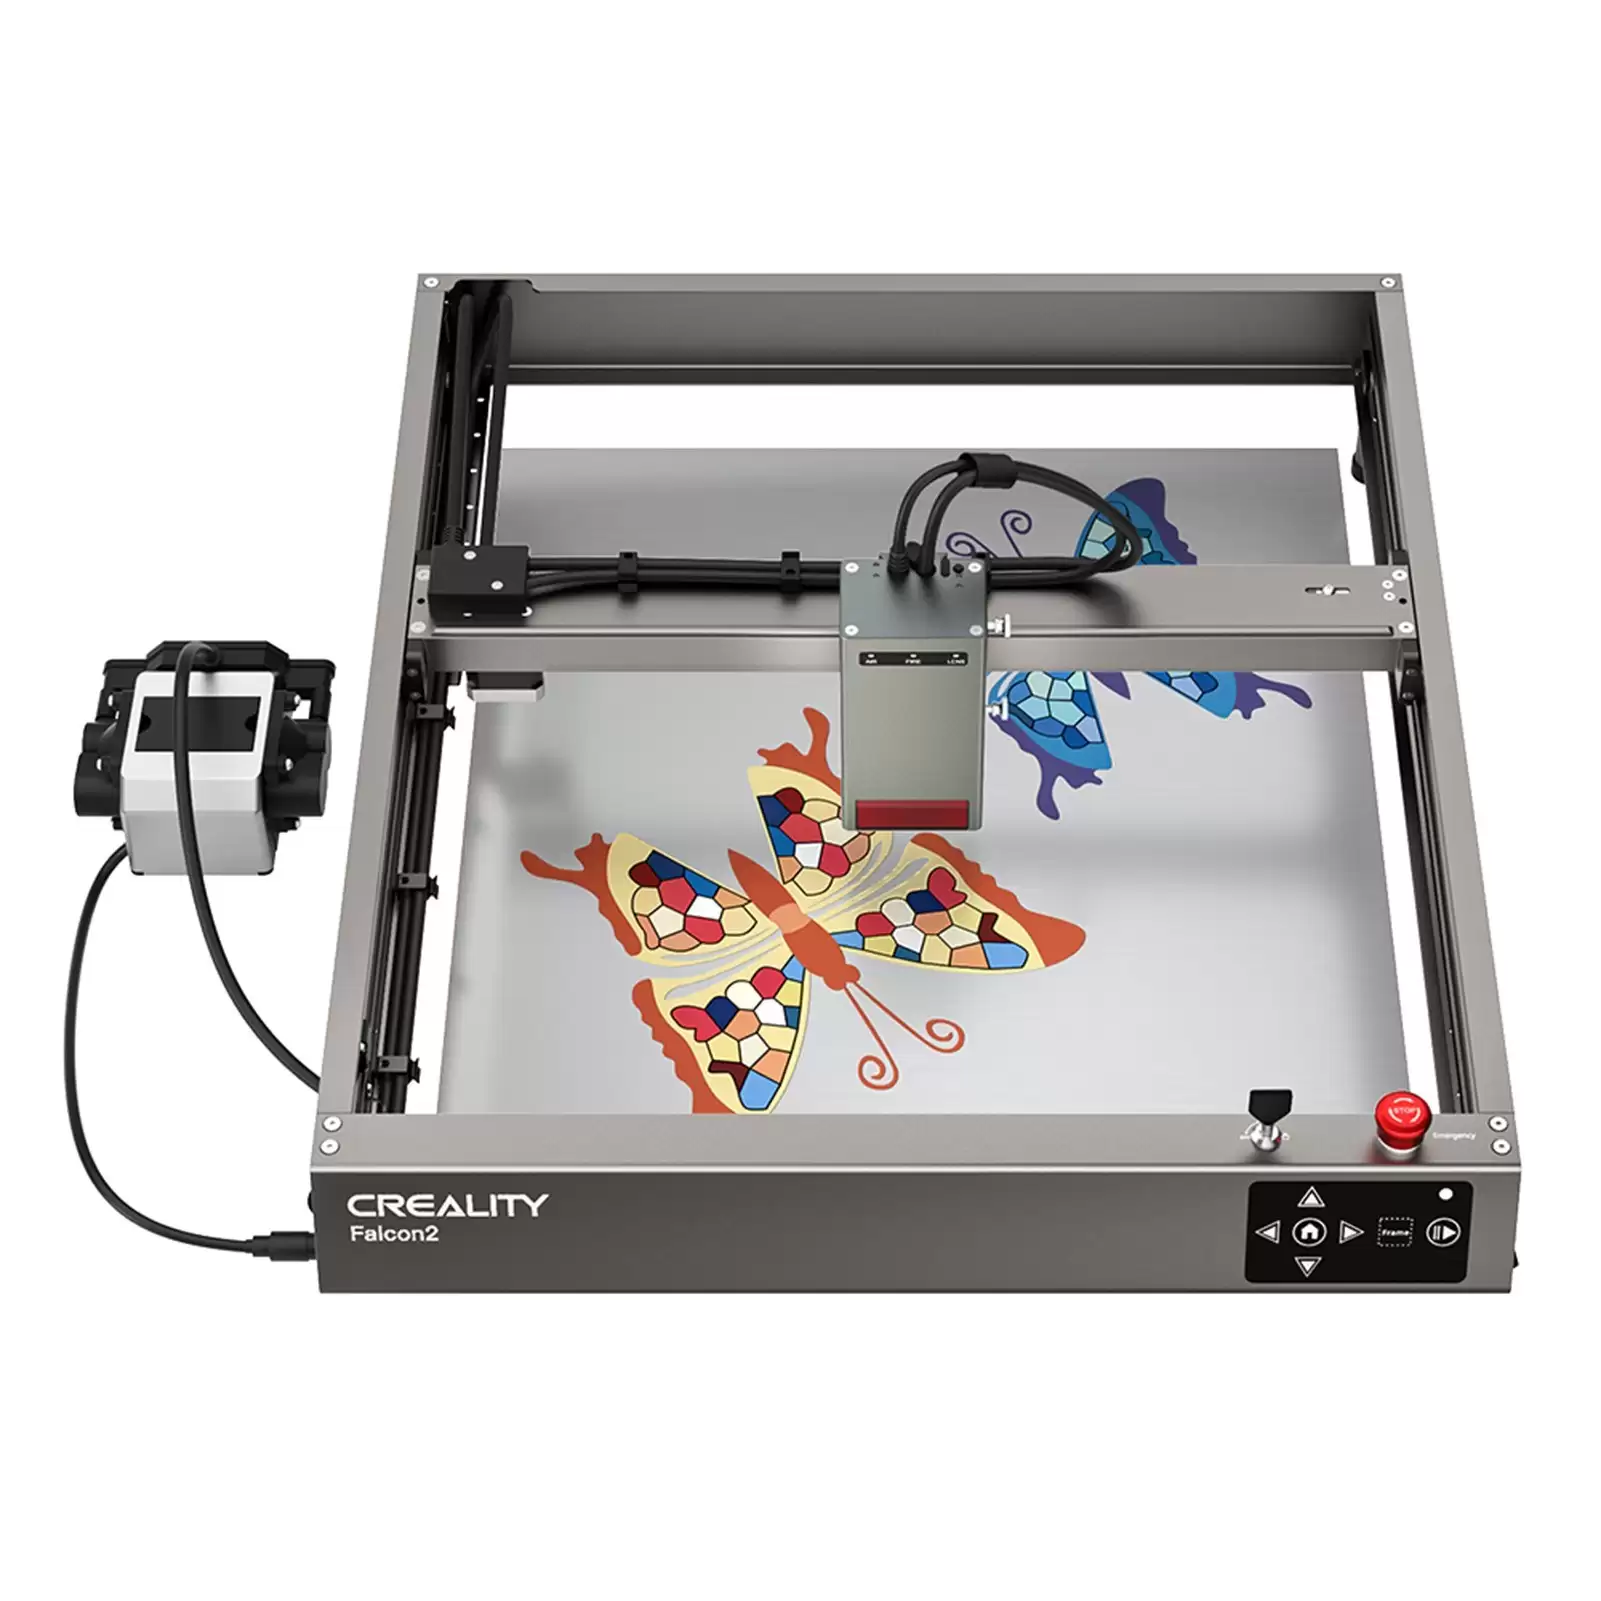 Order In Just €999 Creality Falcon2 40w Laser Engraver With This Discount Coupon At Tomtop